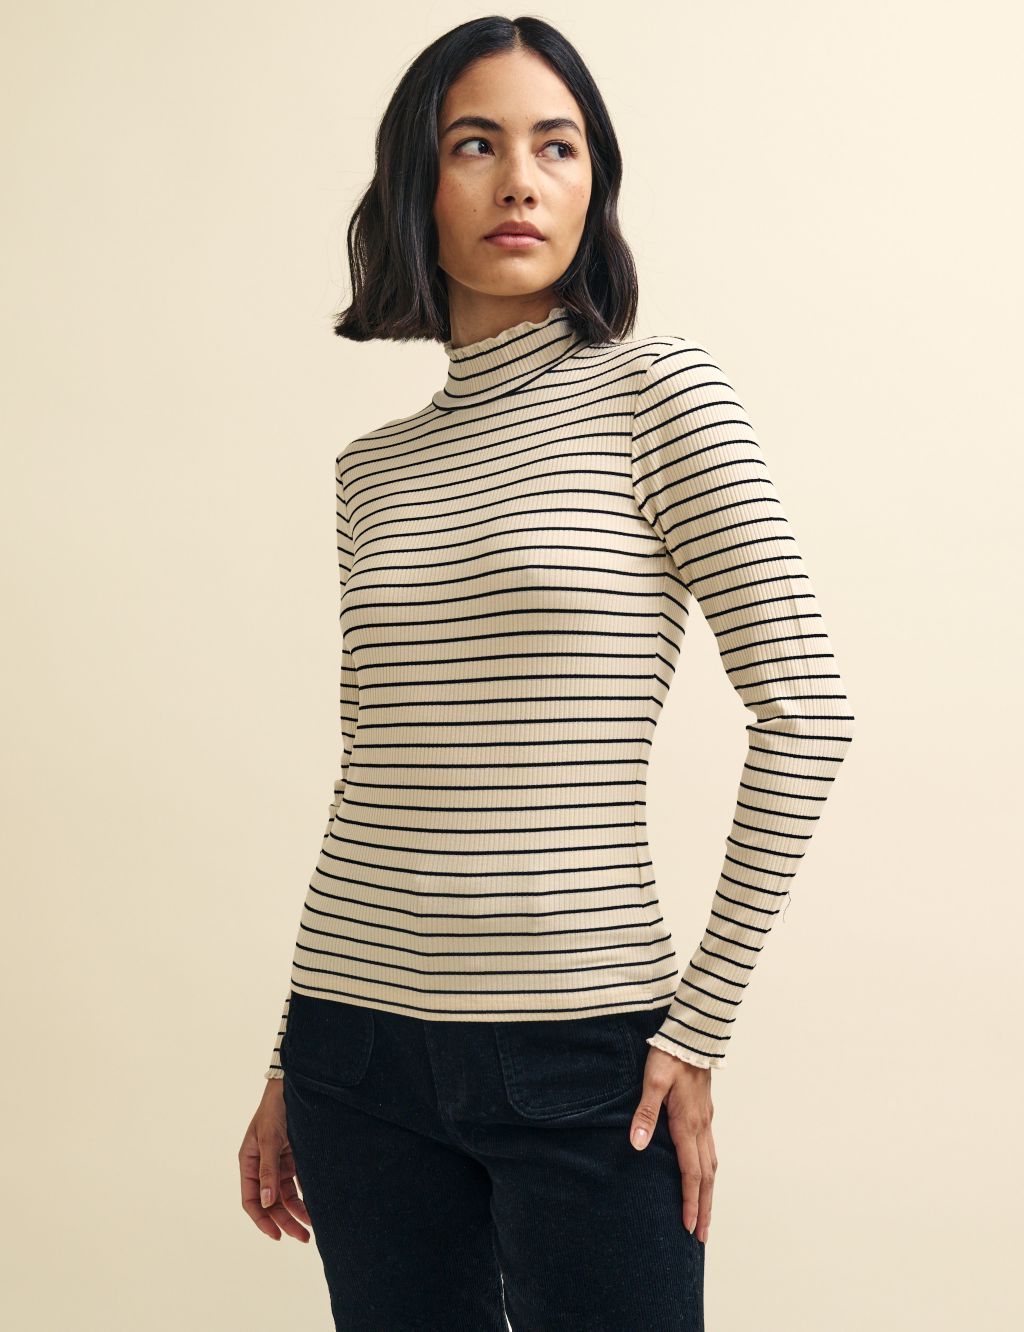 Striped Ribbed Top image 1